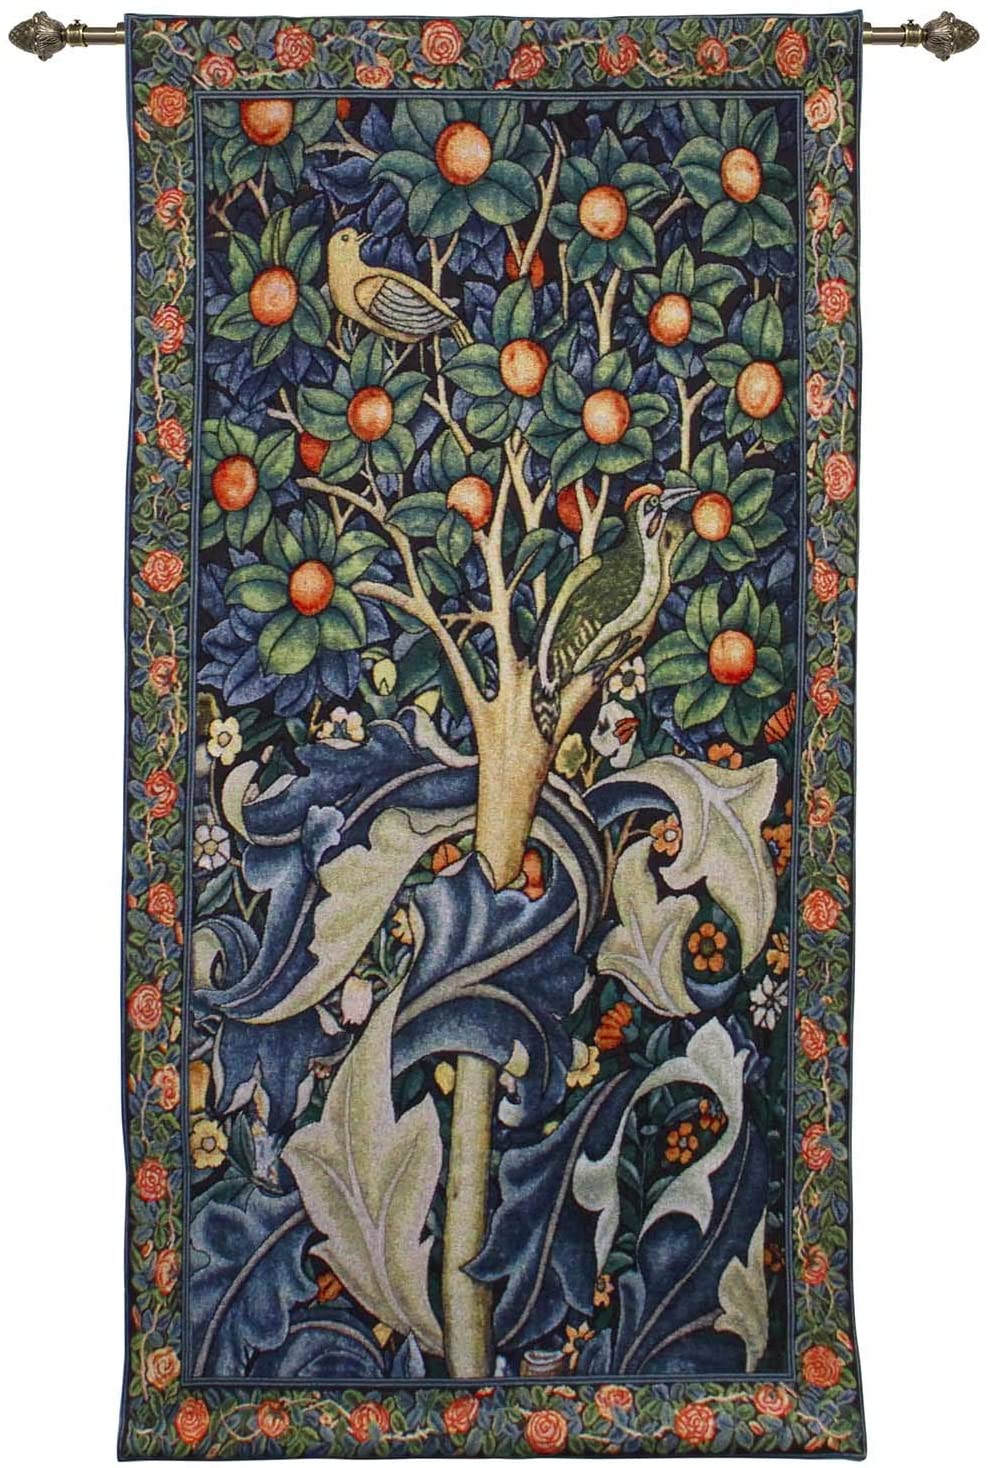 Woodpecker French Wall Tapestry By William Morris Home Deco 138 X 68 cm